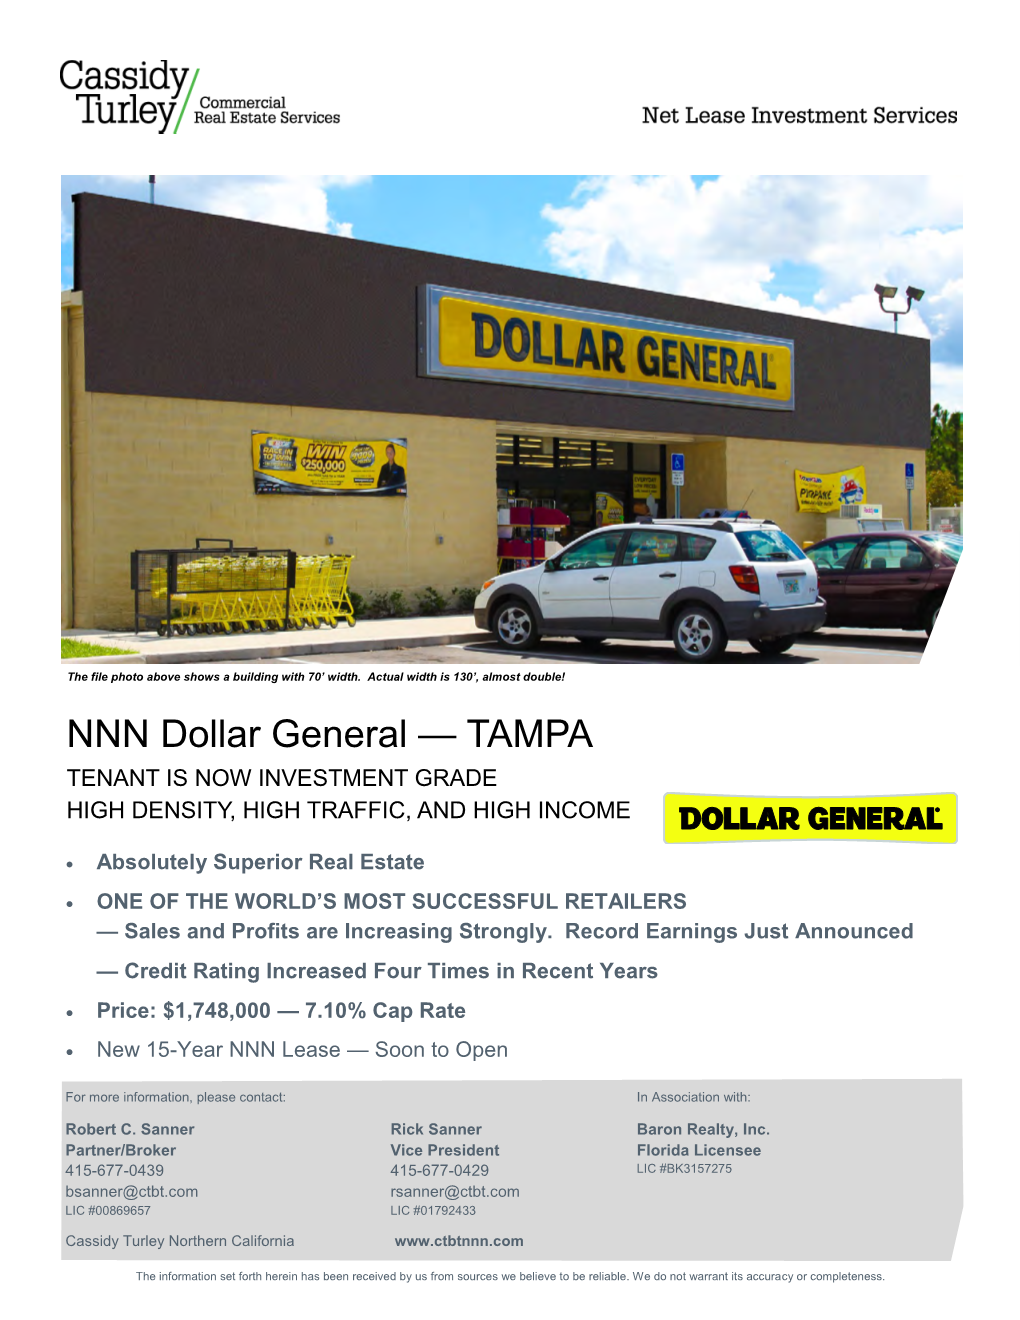 NNN Dollar General — TAMPA TENANT IS NOW INVESTMENT GRADE HIGH DENSITY, HIGH TRAFFIC, and HIGH INCOME